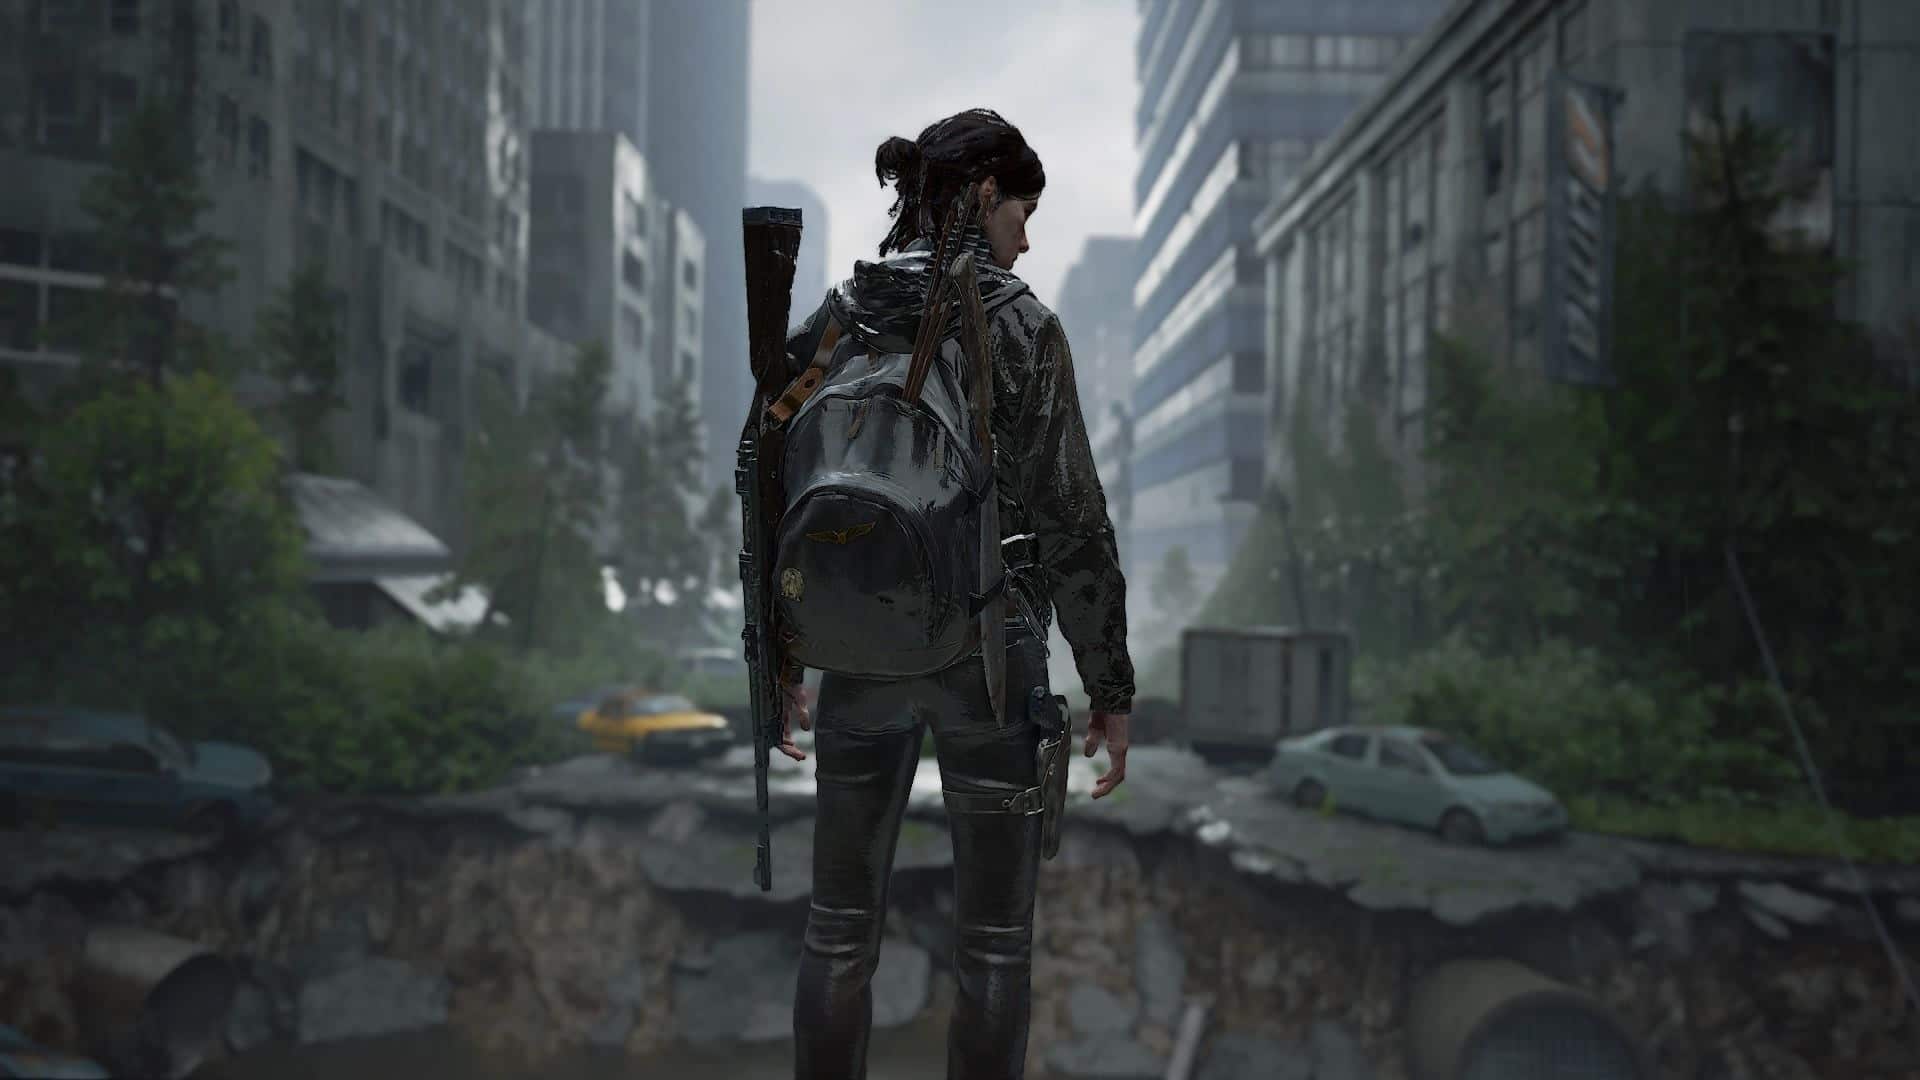 The Last of Us 2 Update 1.08 Adds 60FPS Support for PS5 - MP1st